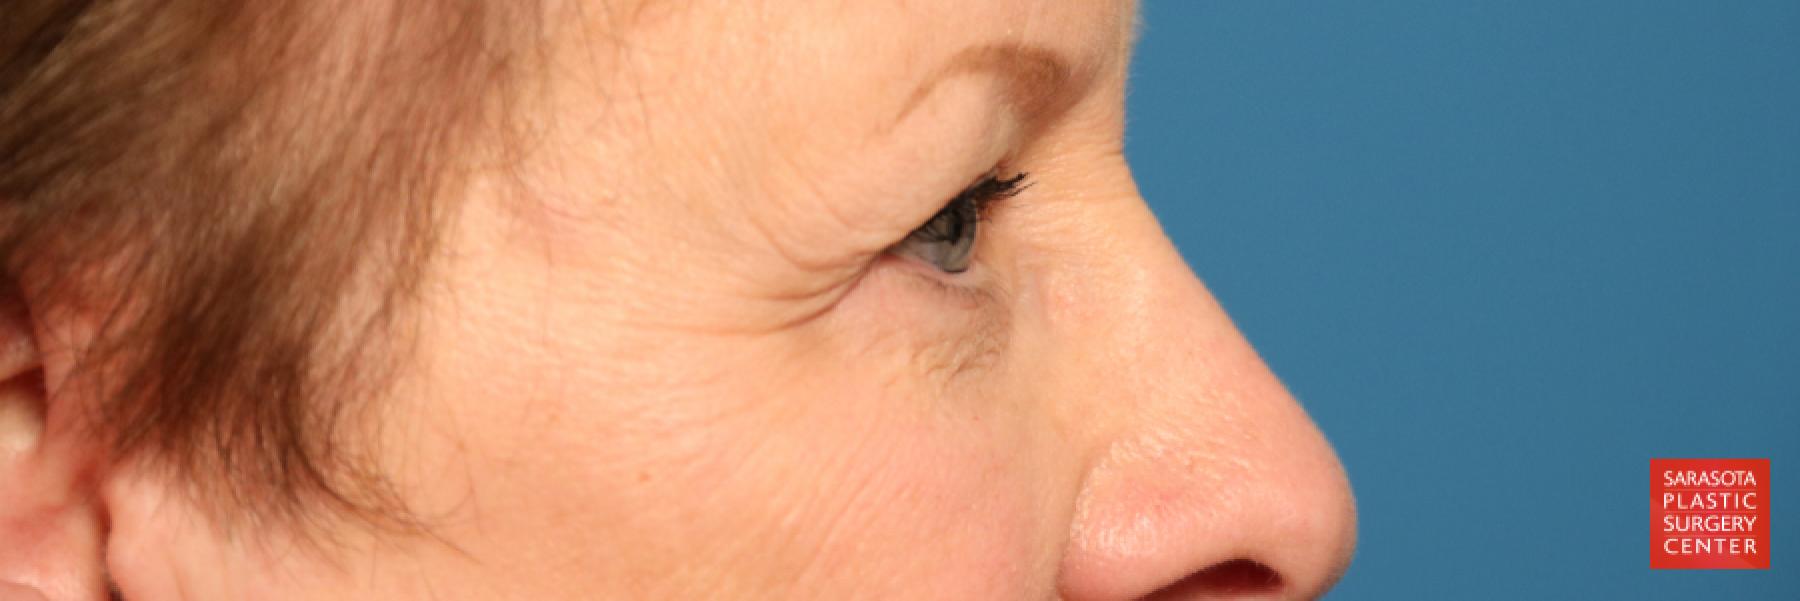 Eyelid Lift: Patient 20 - Before and After 5